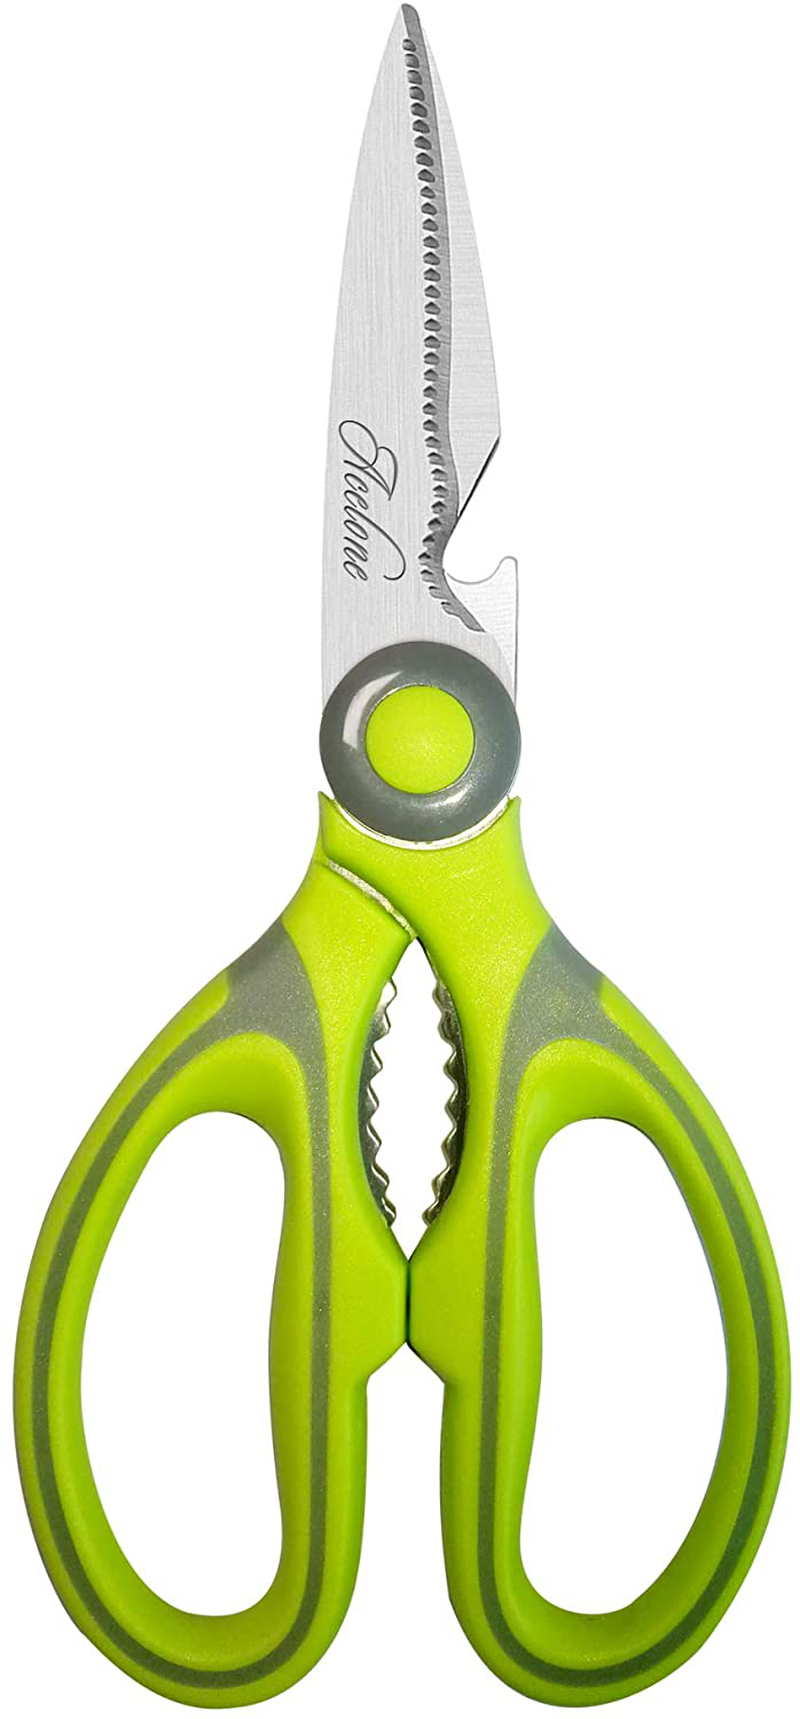 Kitchen Shears, Acelone Premium Heavy Duty Shears Ultra Sharp Stainless Steel Multi-function Kitchen Scissors for Chicken/Poultry/Fish/Meat/Vegetables/Herbs/BBQ… (Light Green)